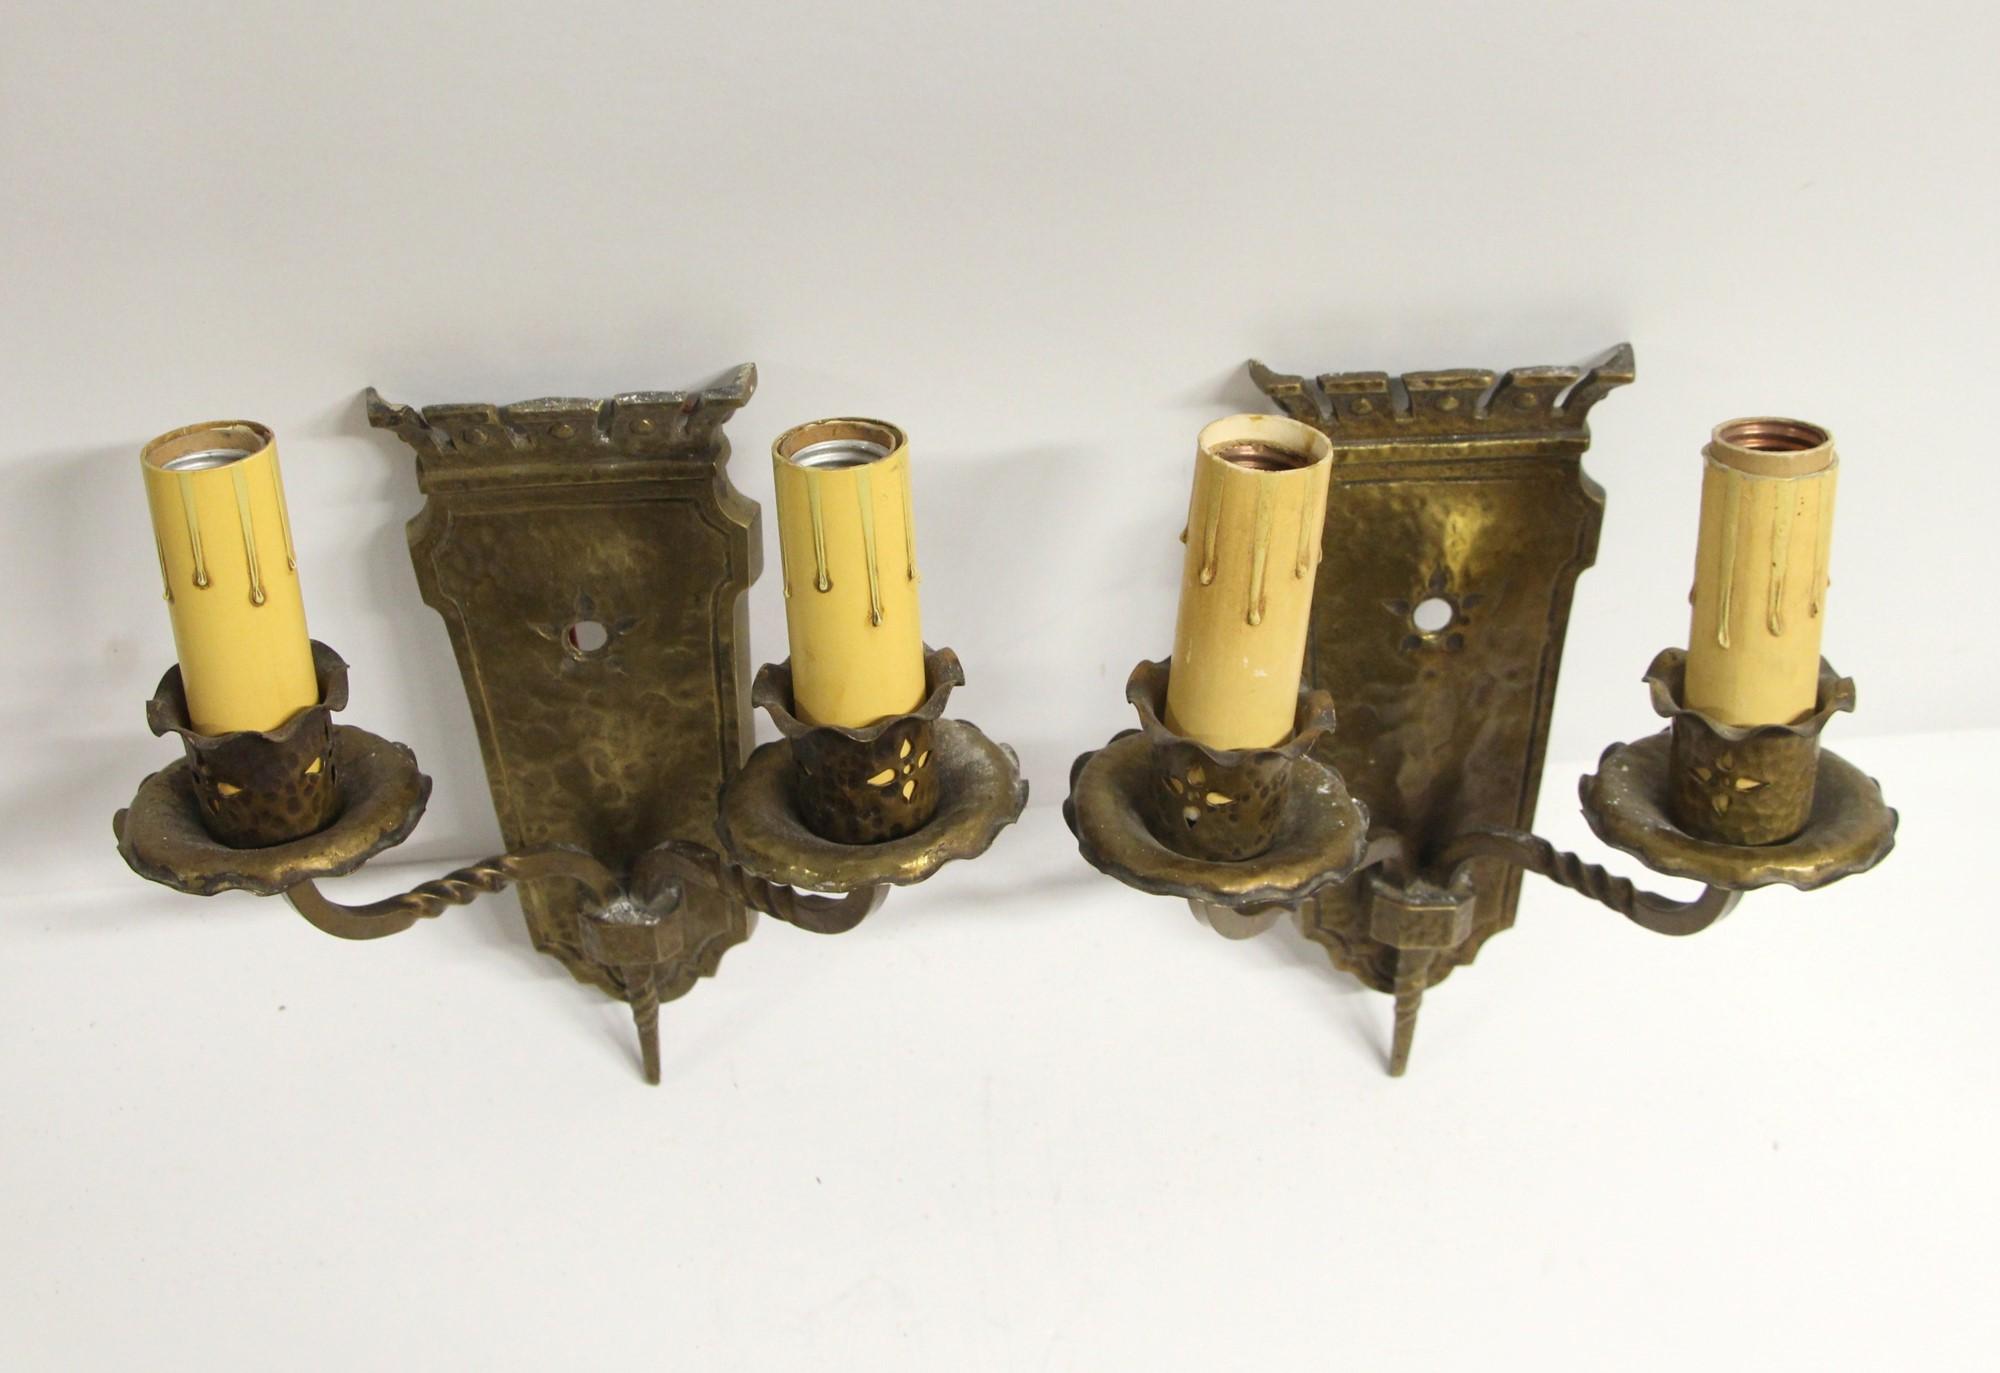 Pair of 1910 Arts & Crafts heavy cast bronze sconces with two lights each and hammered details. Priced as a pair. This can be seen at our 400 Gilligan St location in Scranton, PA.